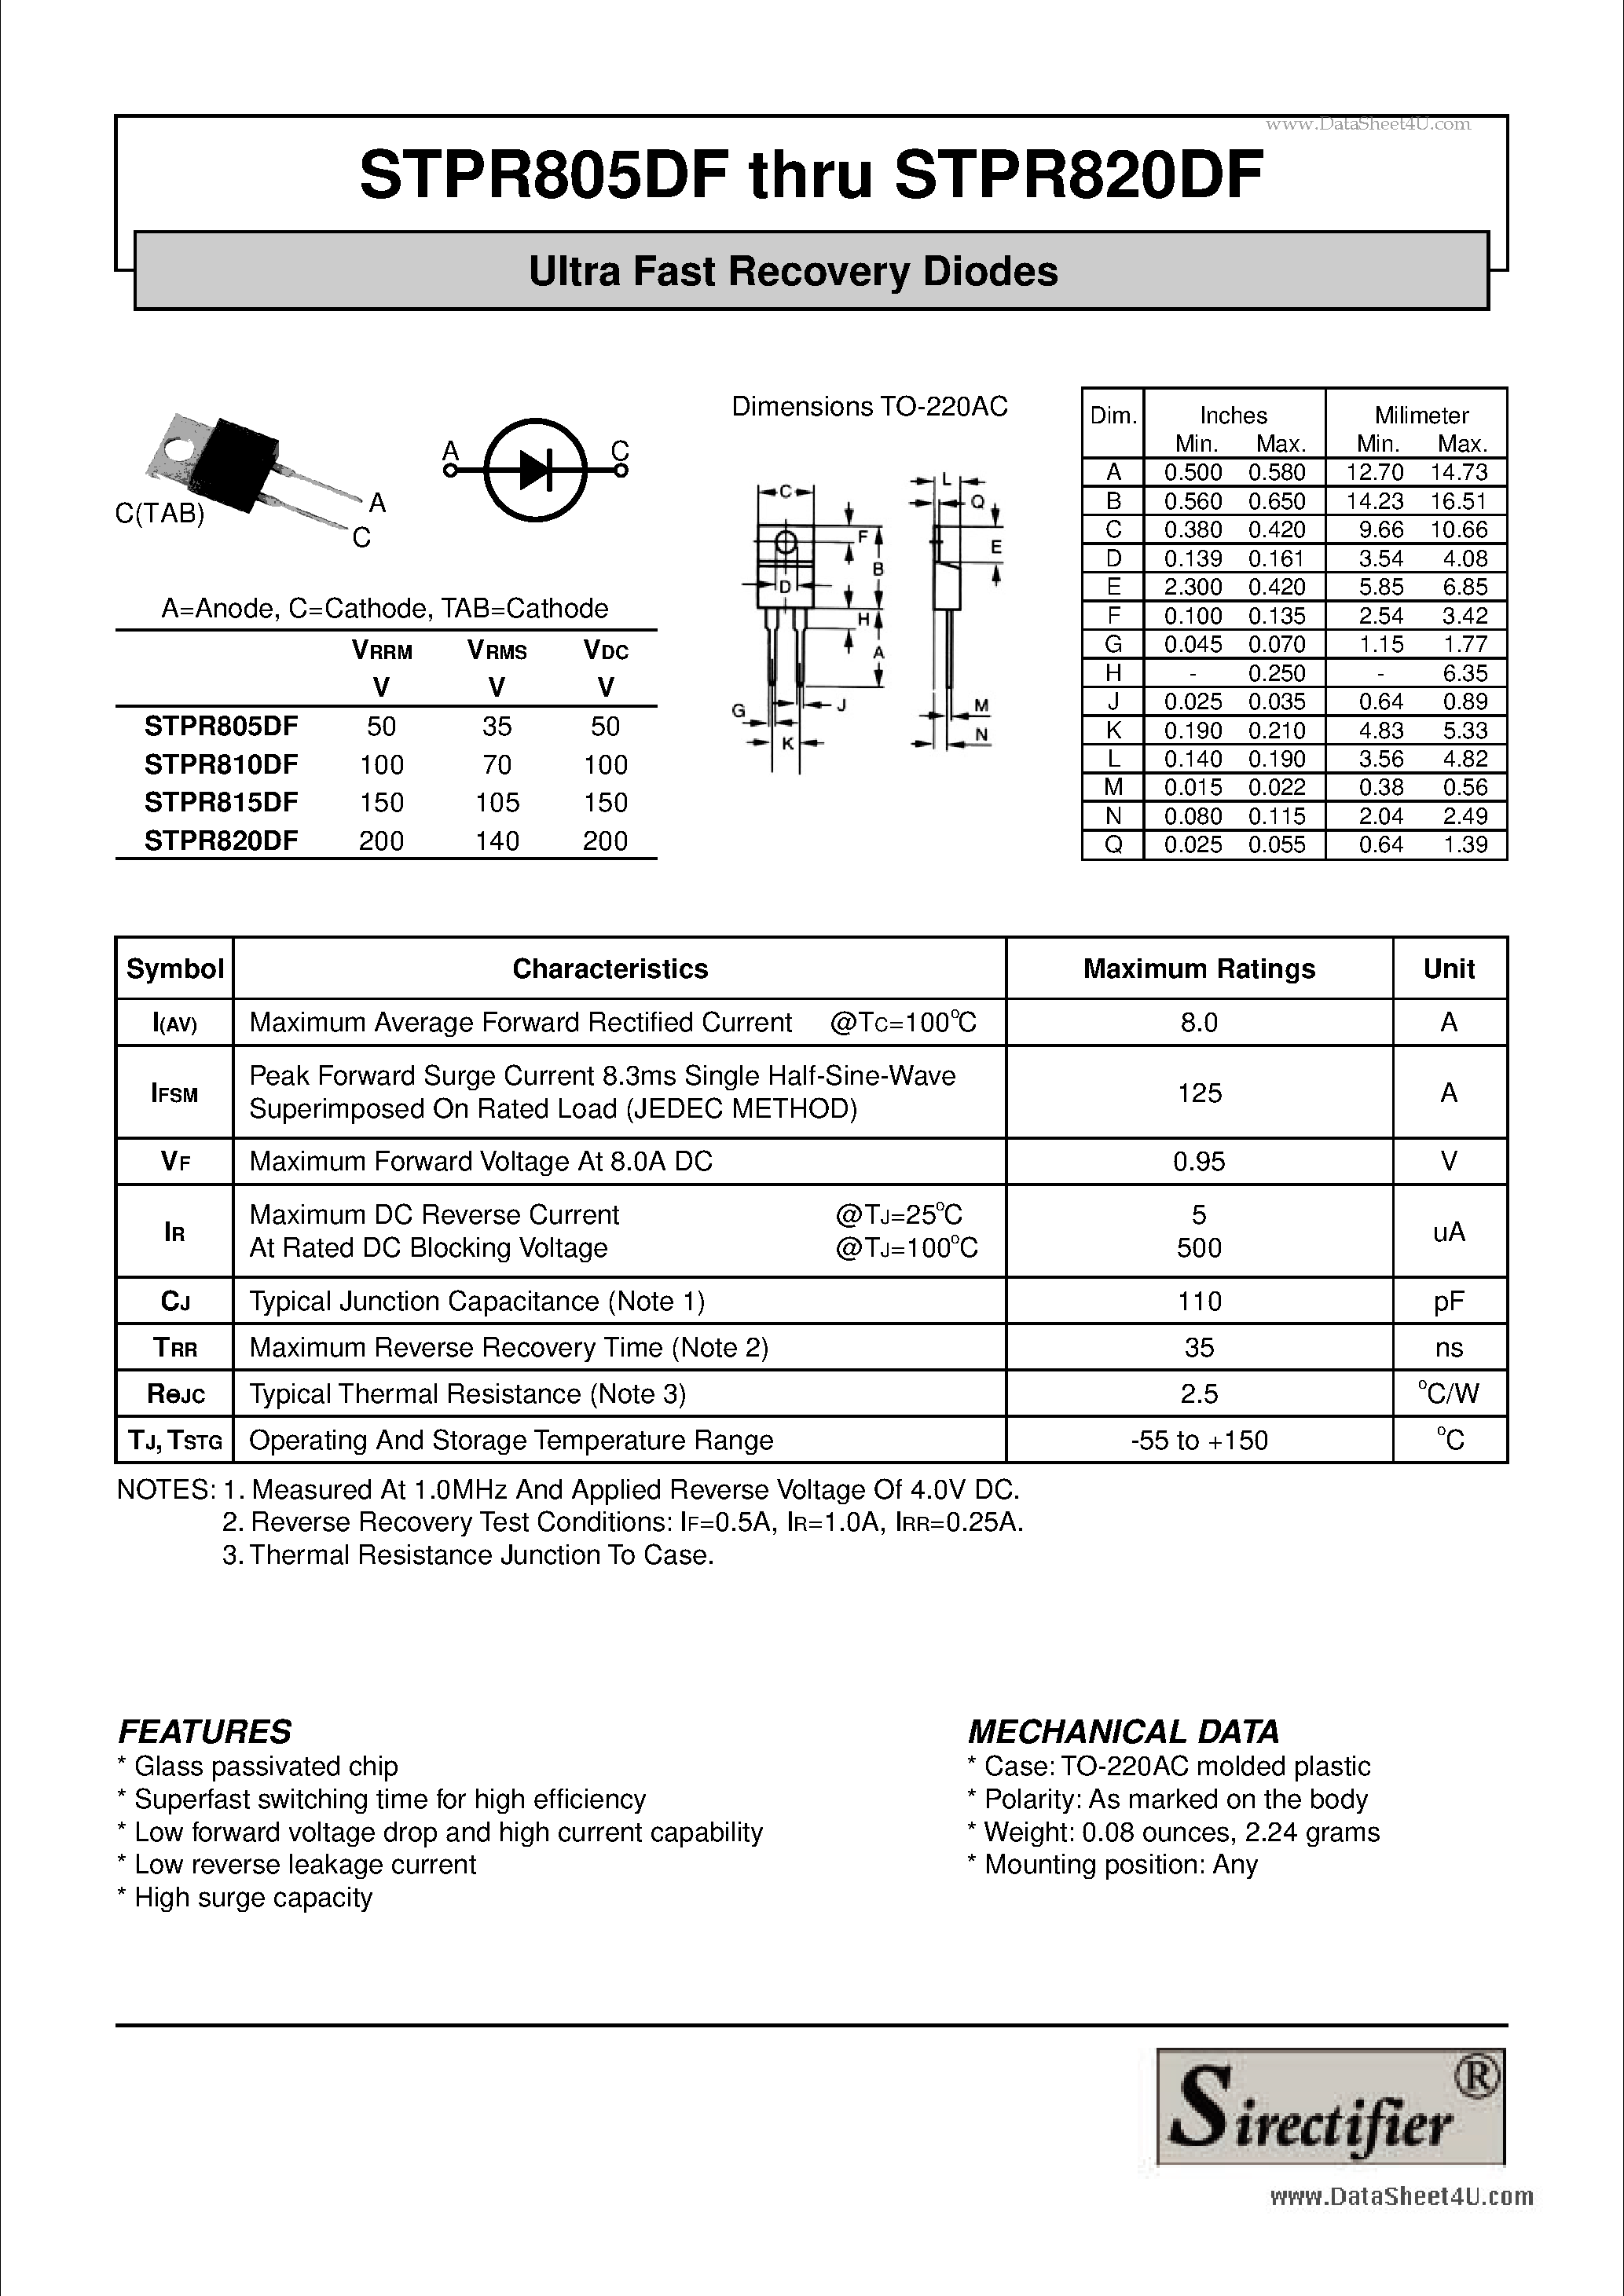 Datasheet STPR805DF - Ultra Fast Recovery Diodes page 1